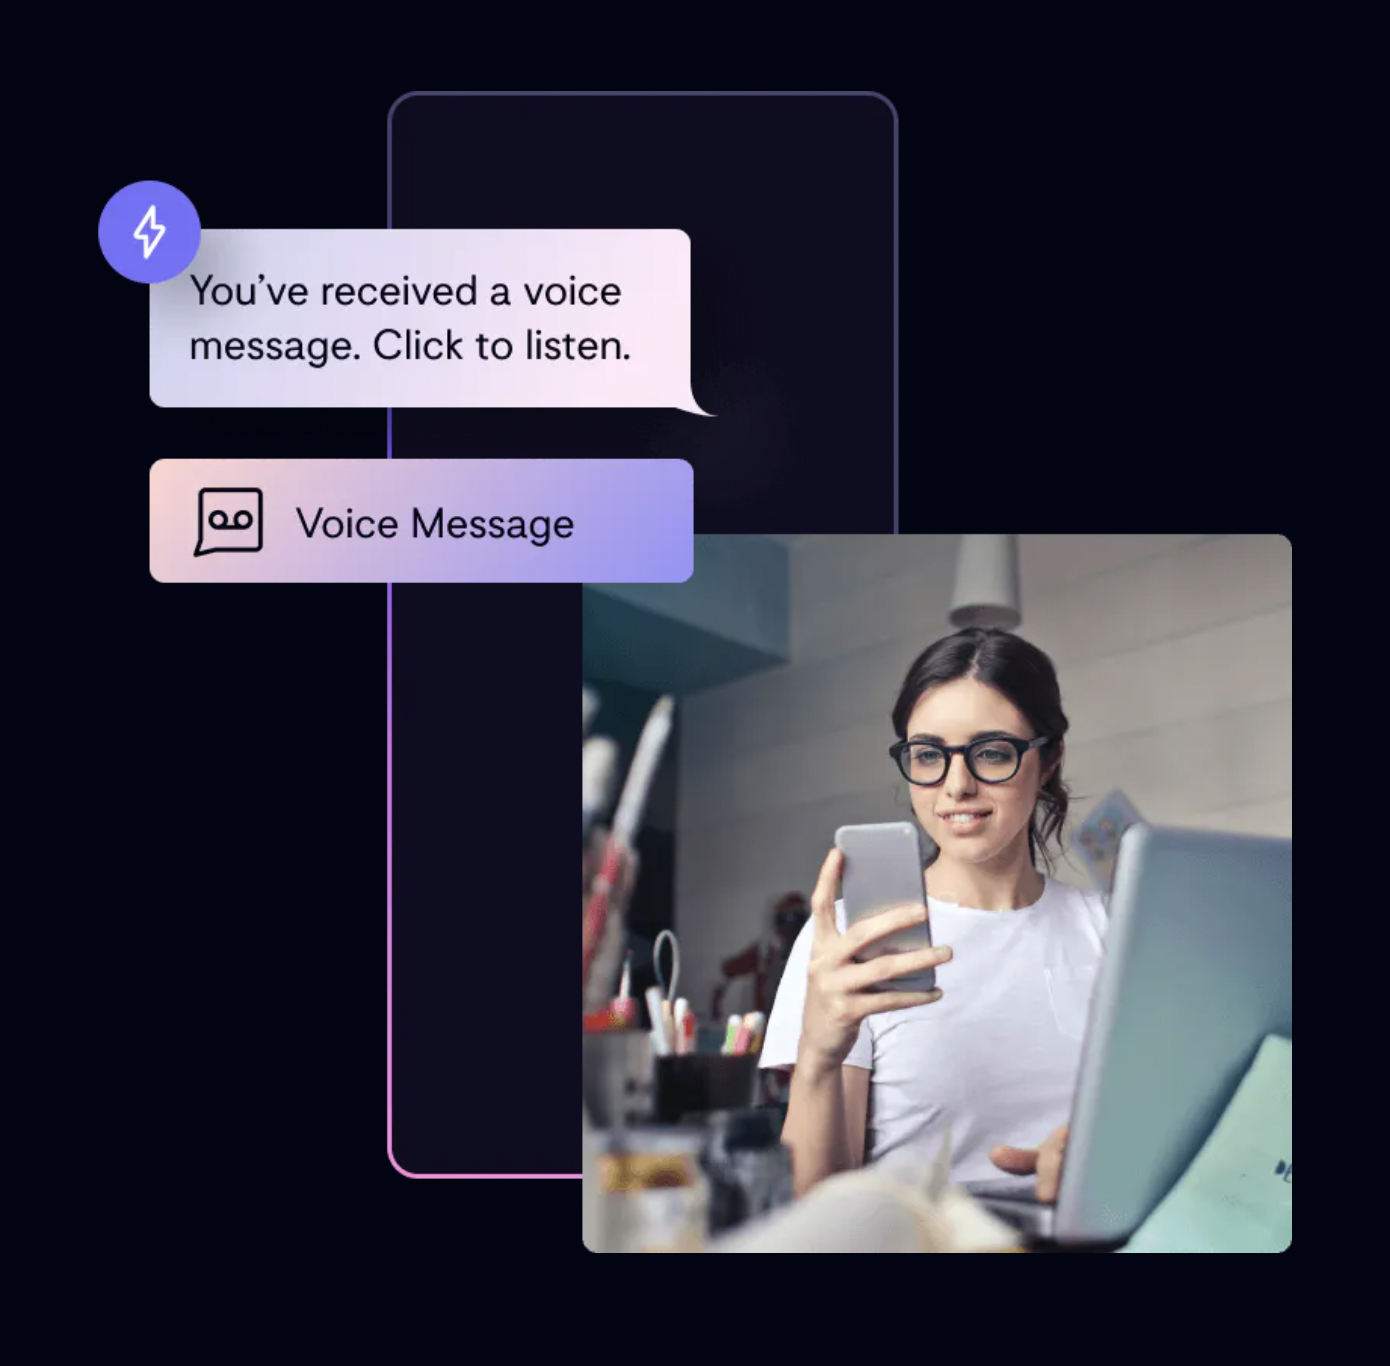 Whatever the scenario, Whispir makes it easy for you to customise your business flows. Create unique voice messages or text your audience and have it relayed via spoken voice.